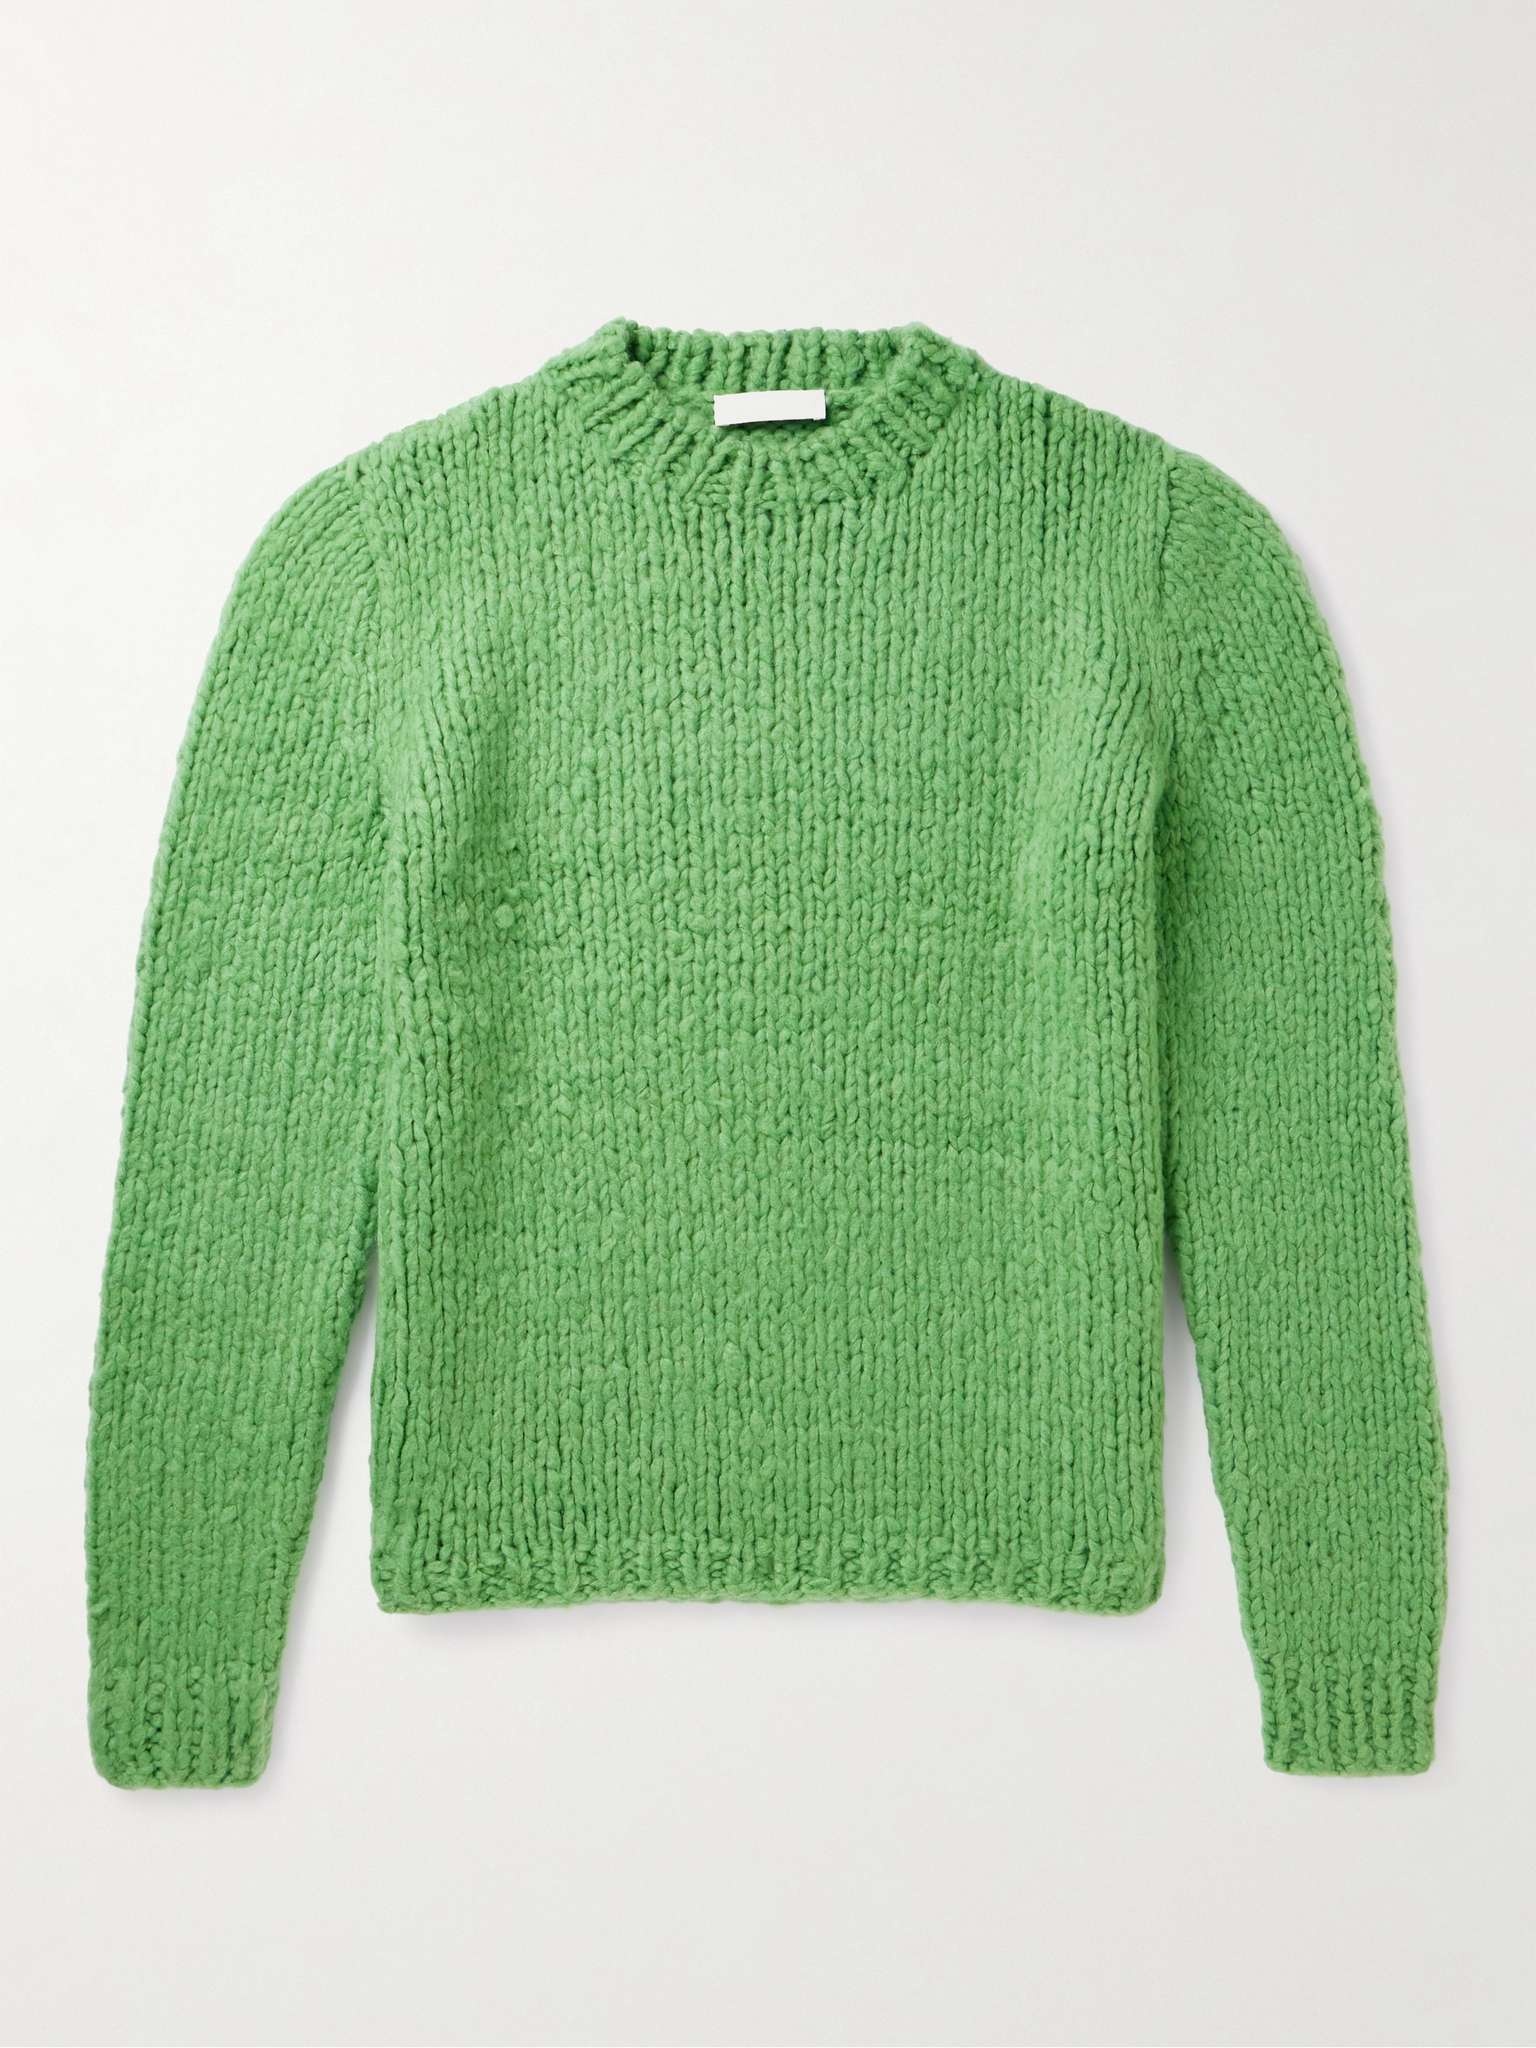 Lawrence Welfat Cashmere Sweater - 1